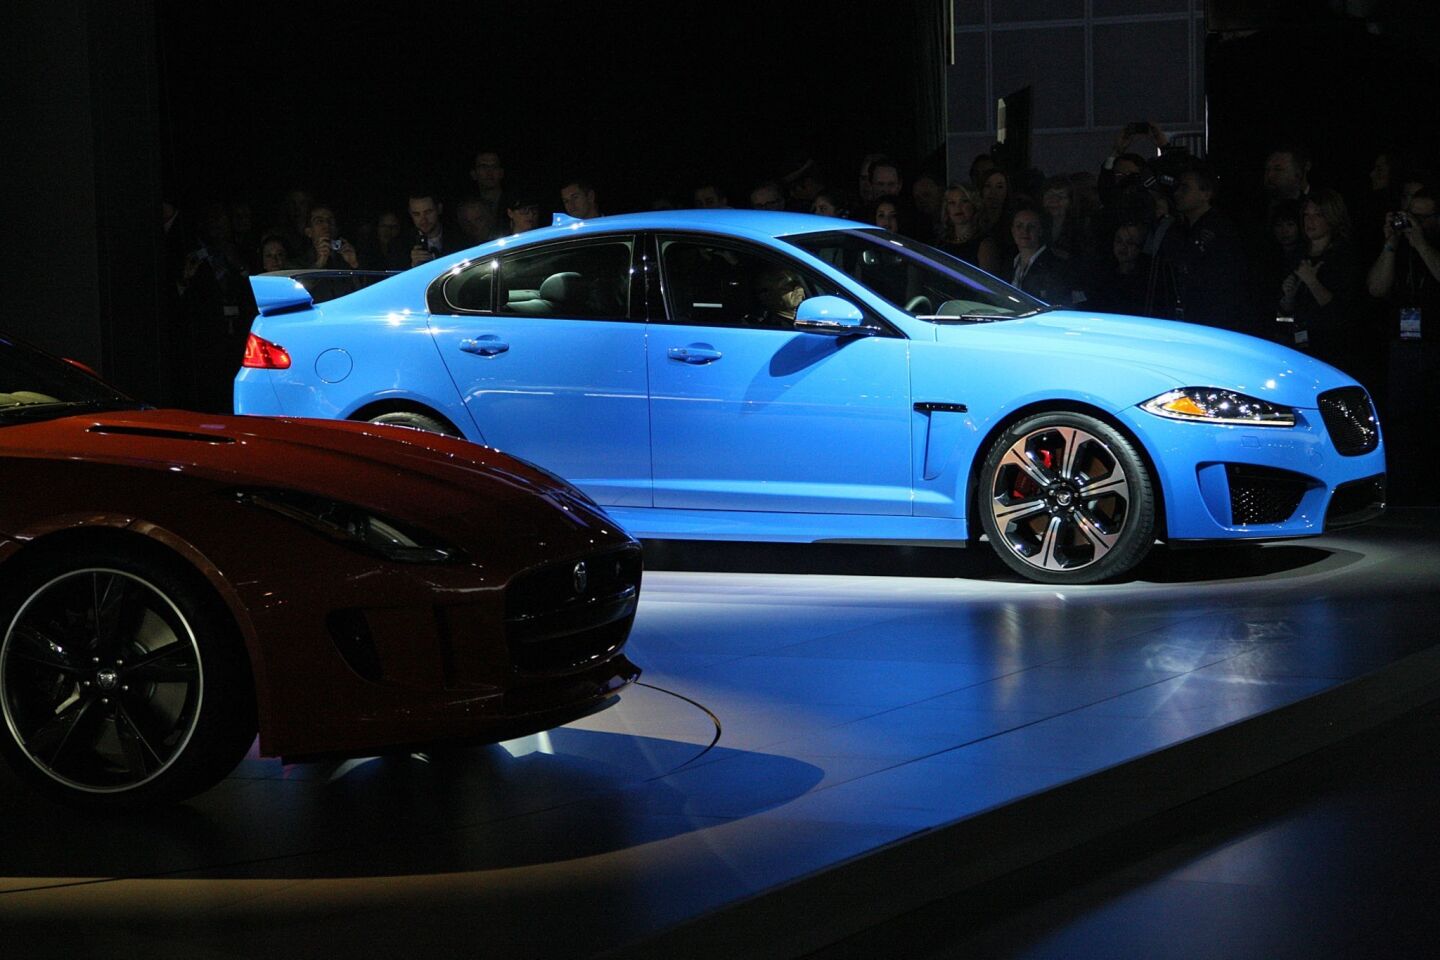 The Jaguar XFR-S has its world debut at the L.A. Auto Show. The four-door sedan will have a supercharged V-8, making 550 horsepower.More: Jaguar touts F-Type, redesigned Range Rover and XFR-S, which will have only 100 copies in U.S. for 2014